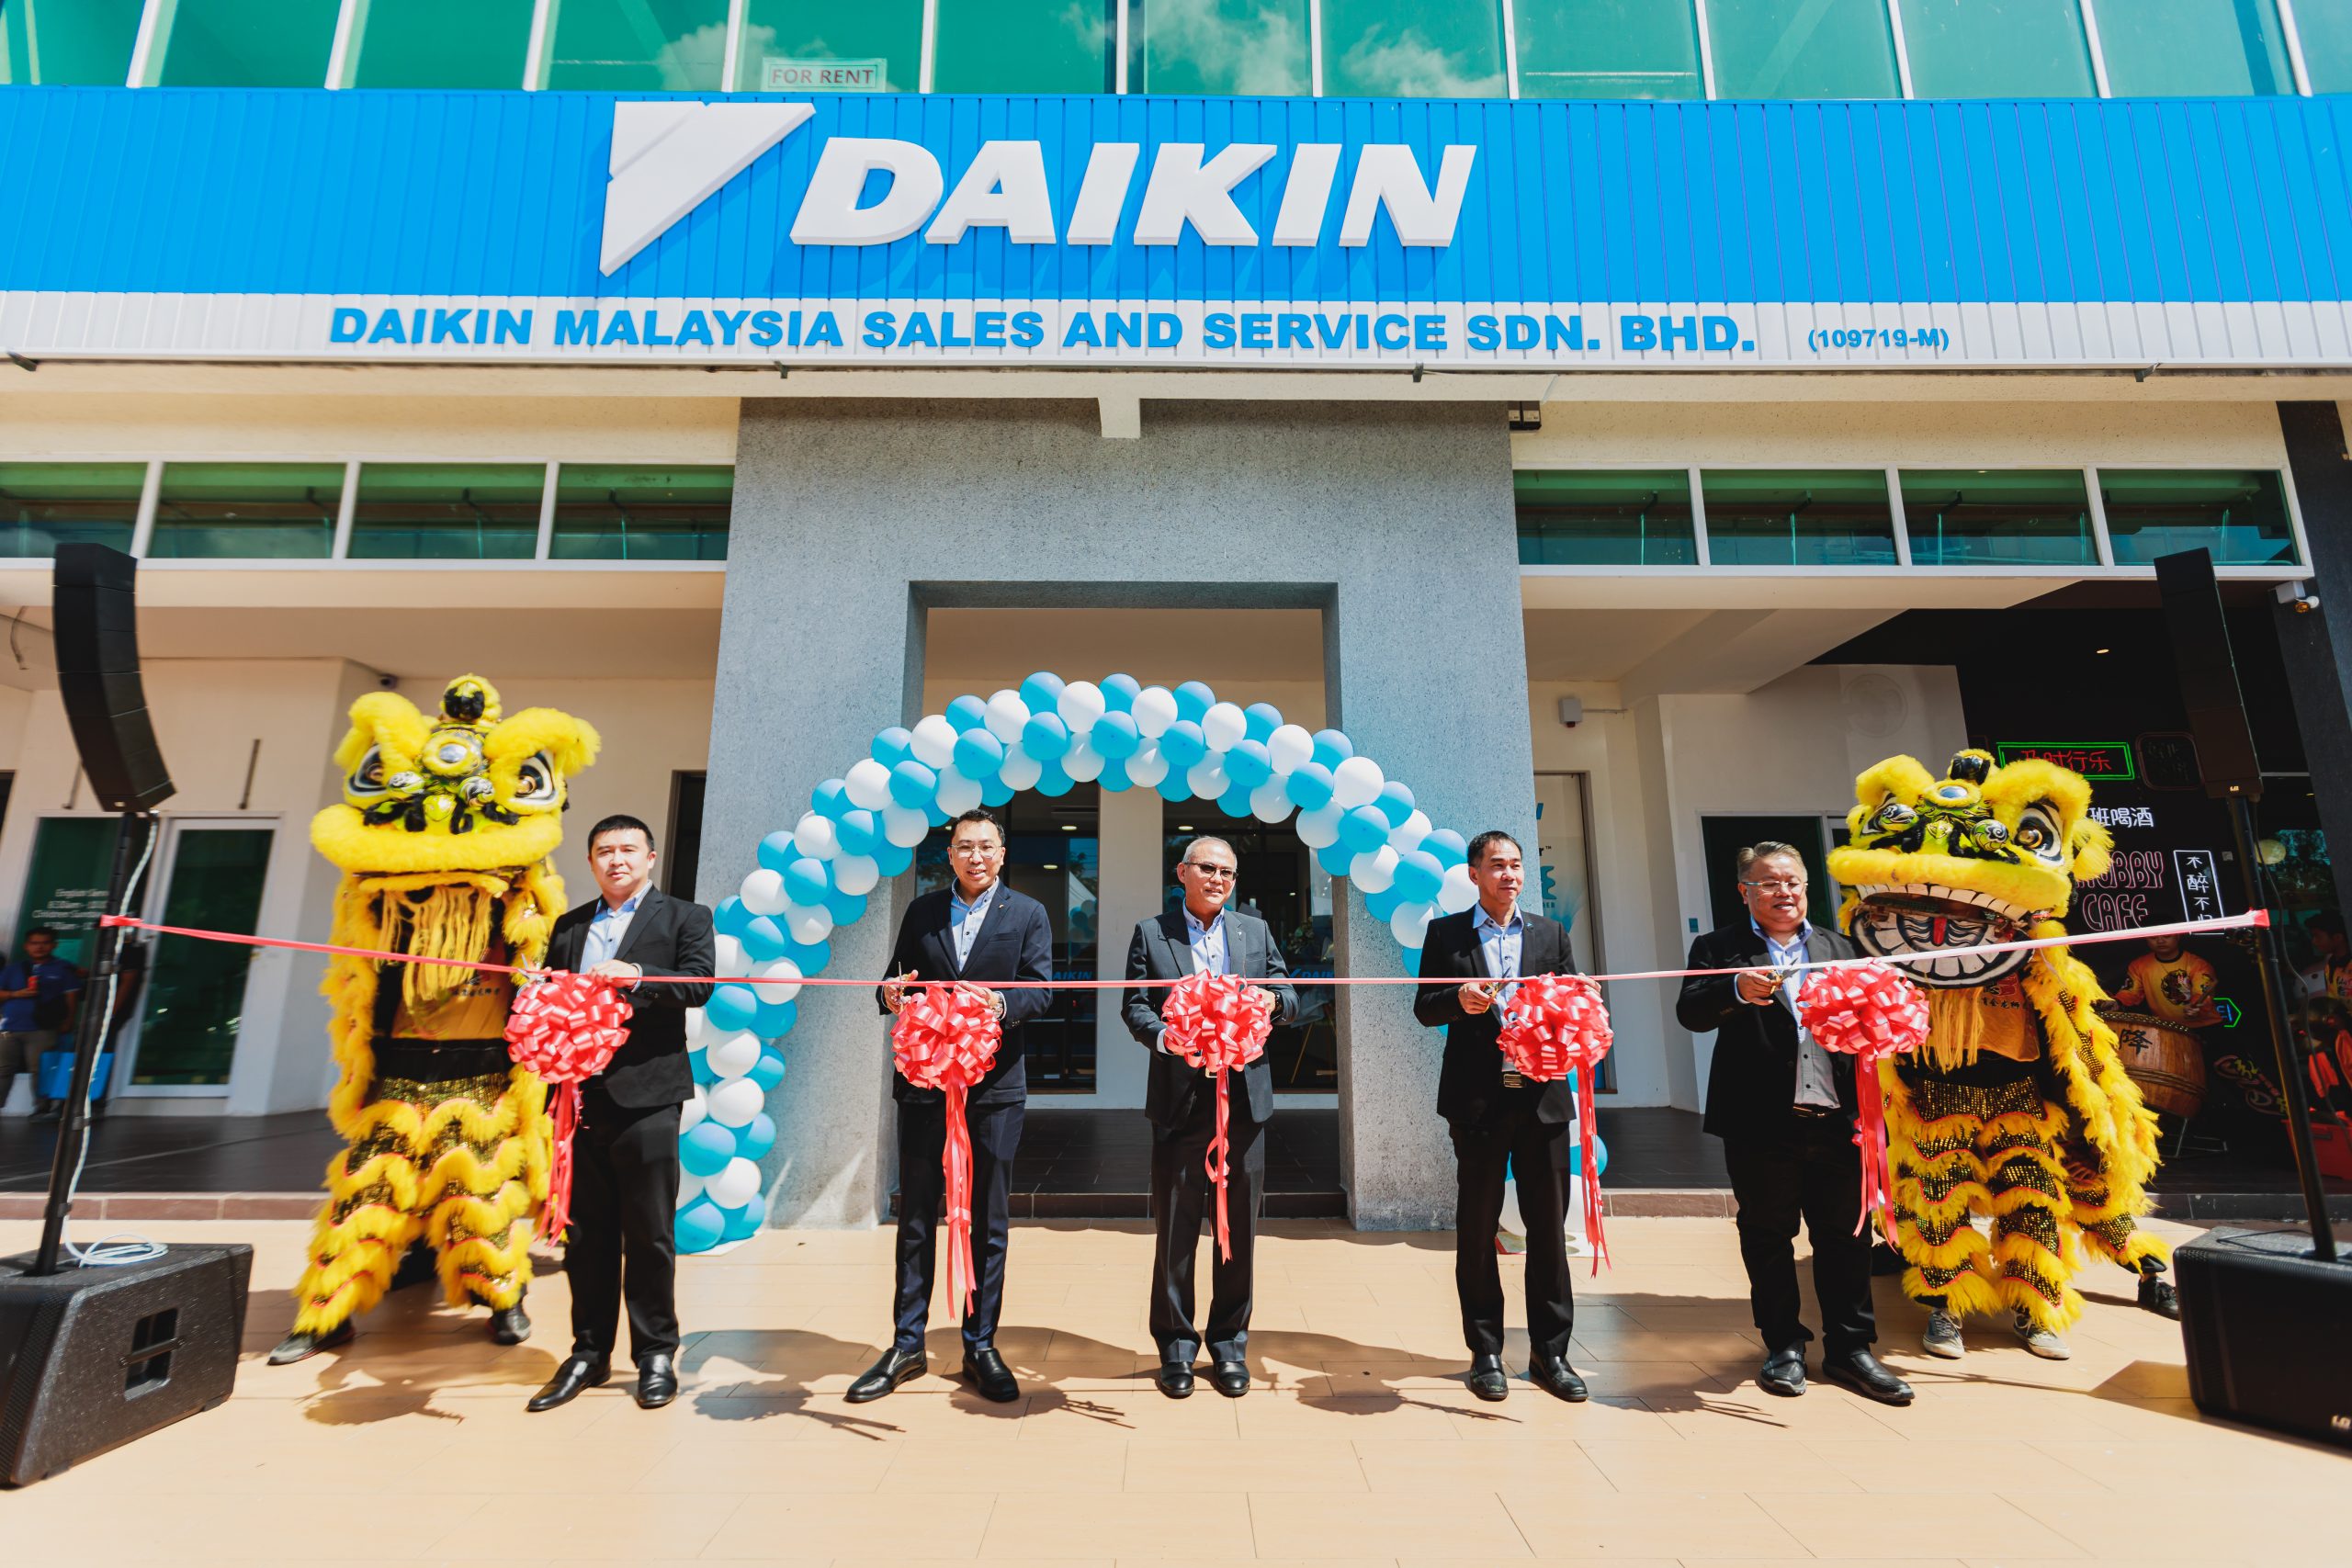 DAIKIN MALAYSIA CONTINUES SERVICE EXCELLENCE BY OPENING NEW SERVICE CENTRE IN MIRI | Daikin Malaysia